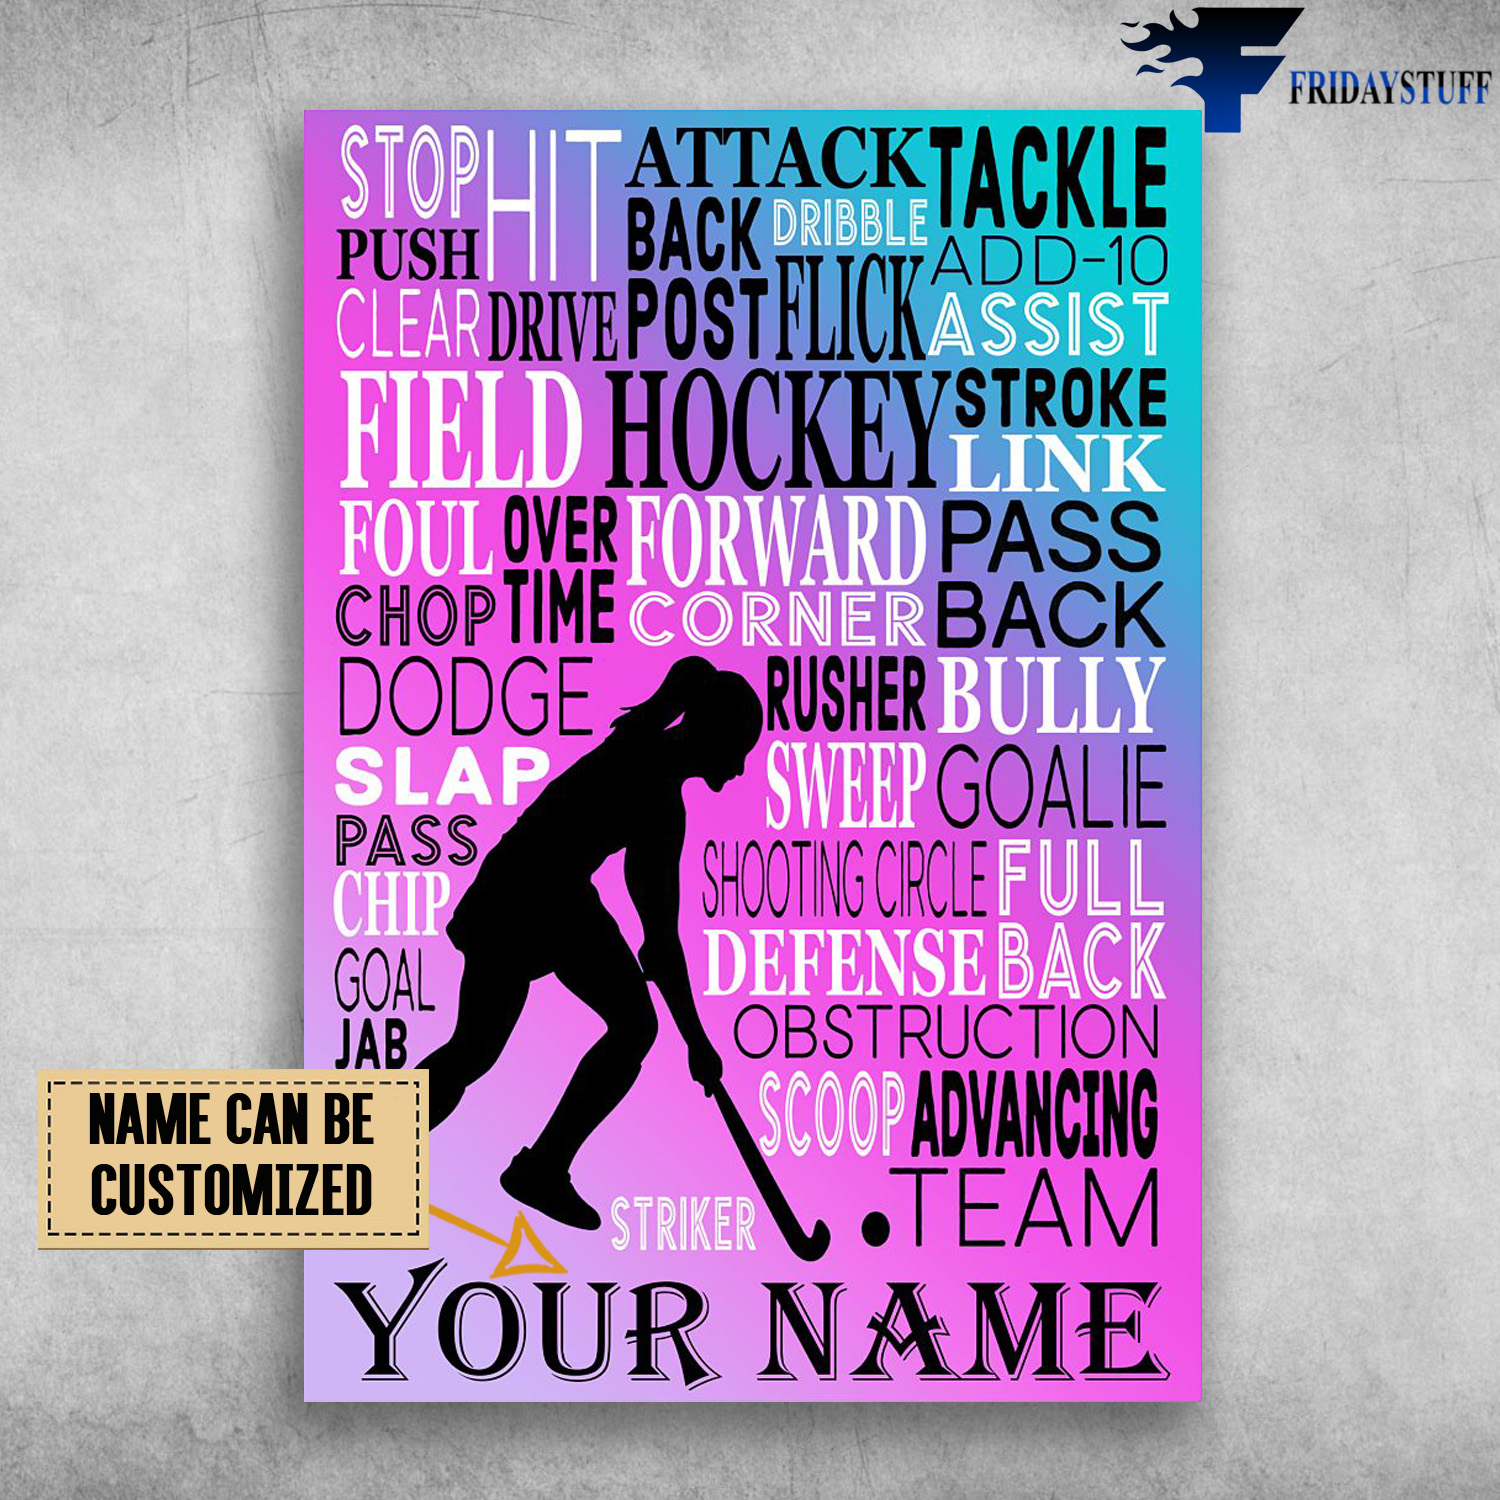 Girl Hockey, Stop, Hit, Attack, Tackle, Push, Clear, Drive, Black, Post, Flick, Bribble, Add-10, Assist, Fielf, Hockey, Stroke, Link, Foul, Over TIme, Chop, Forward, Corner, Pass Back, Rusher, Bully, Sweep, Goalie, Slap, Pass, Chip, Shooting Circle